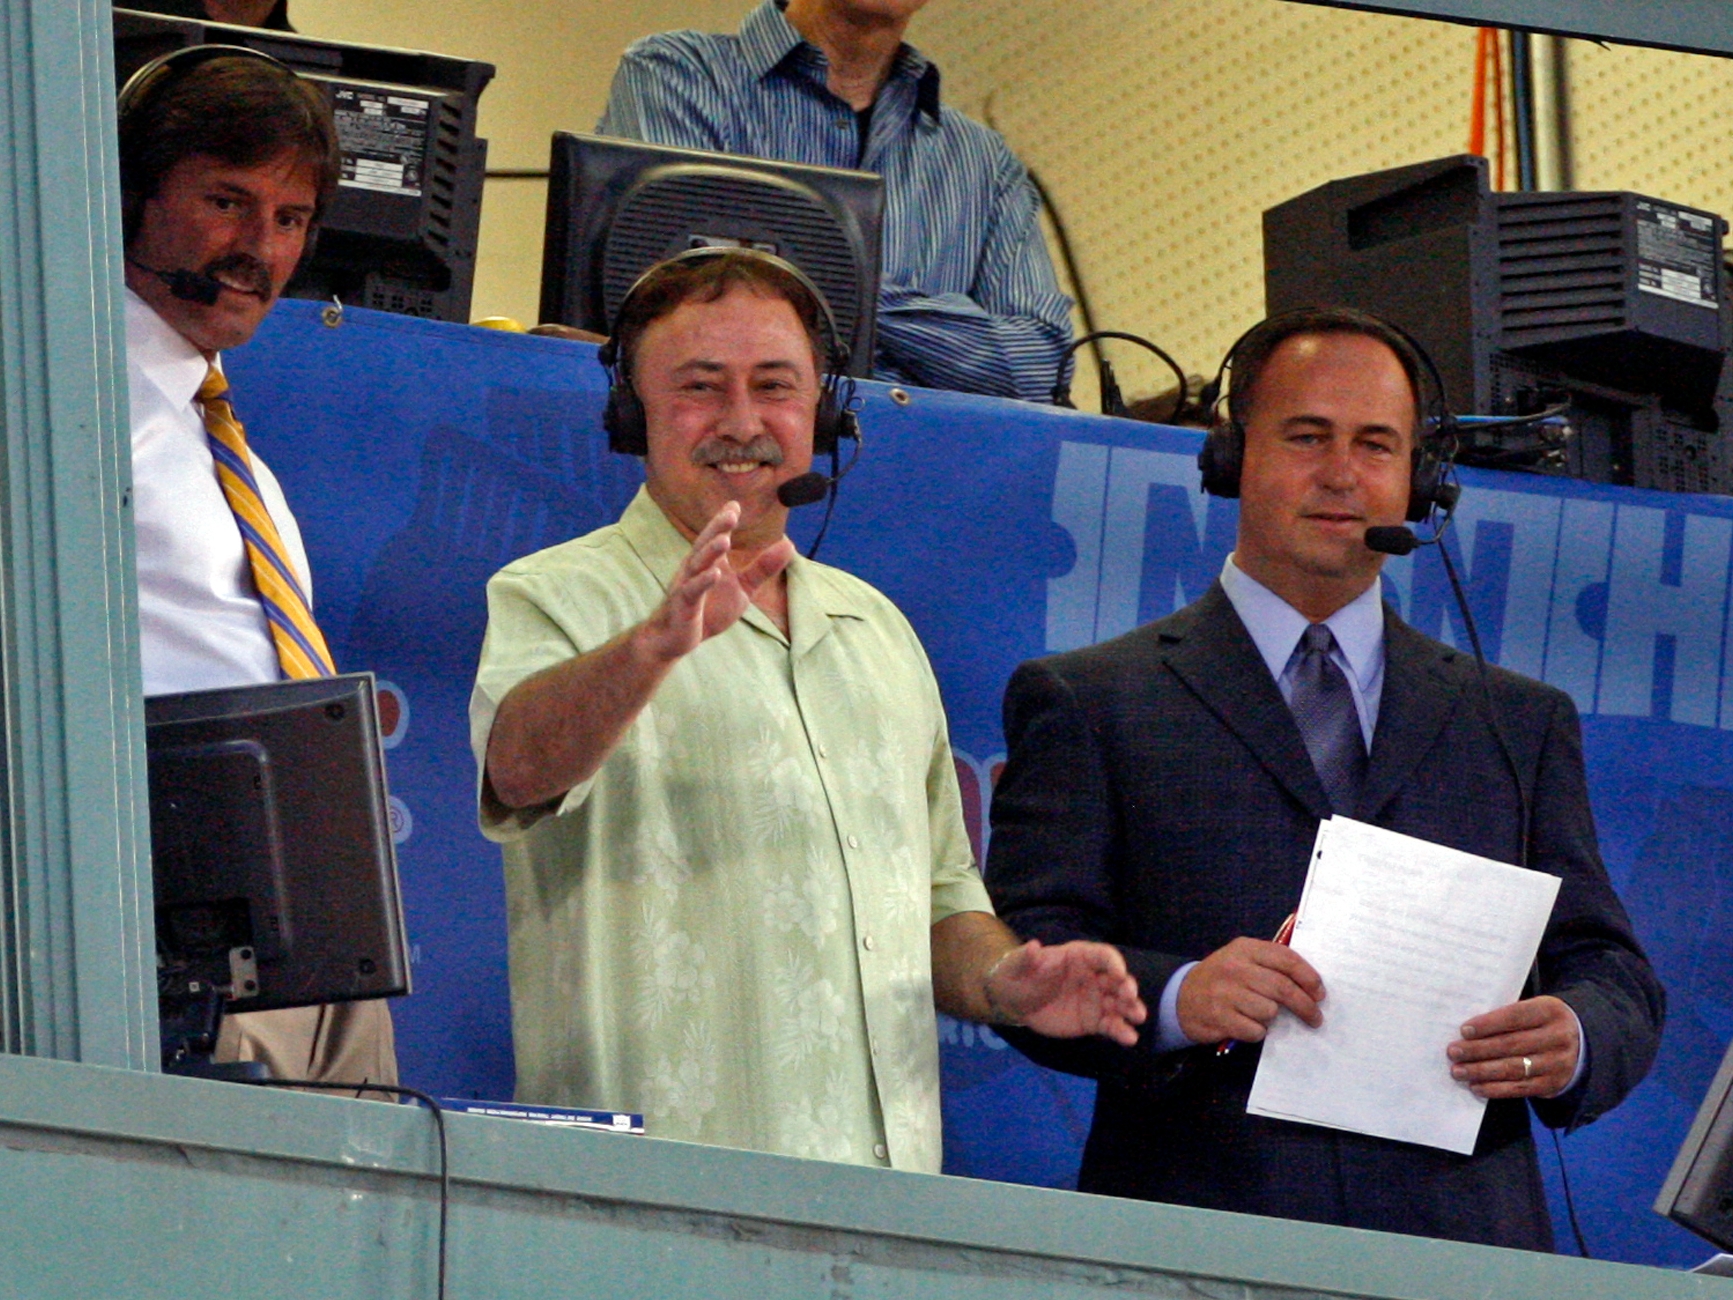 Jerry Remy obituary: Red Sox All-Star dies at 68 –